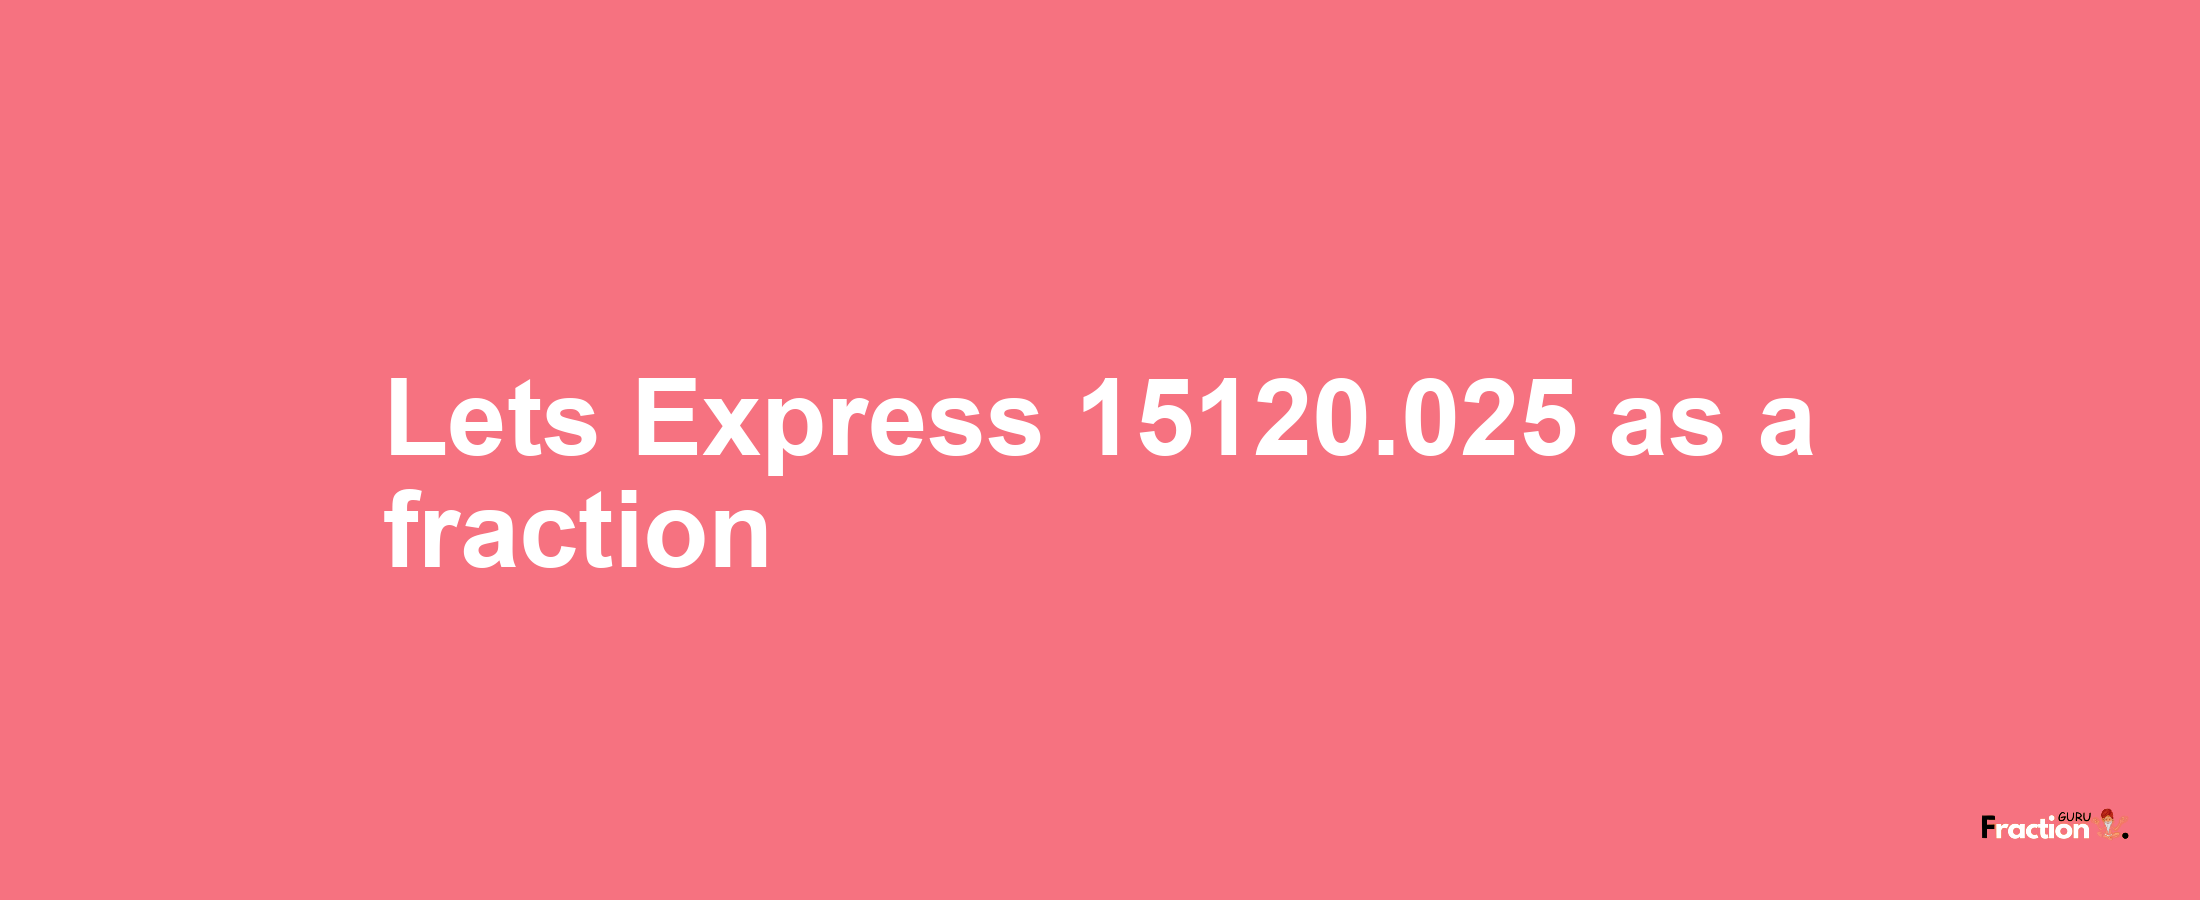 Lets Express 15120.025 as afraction